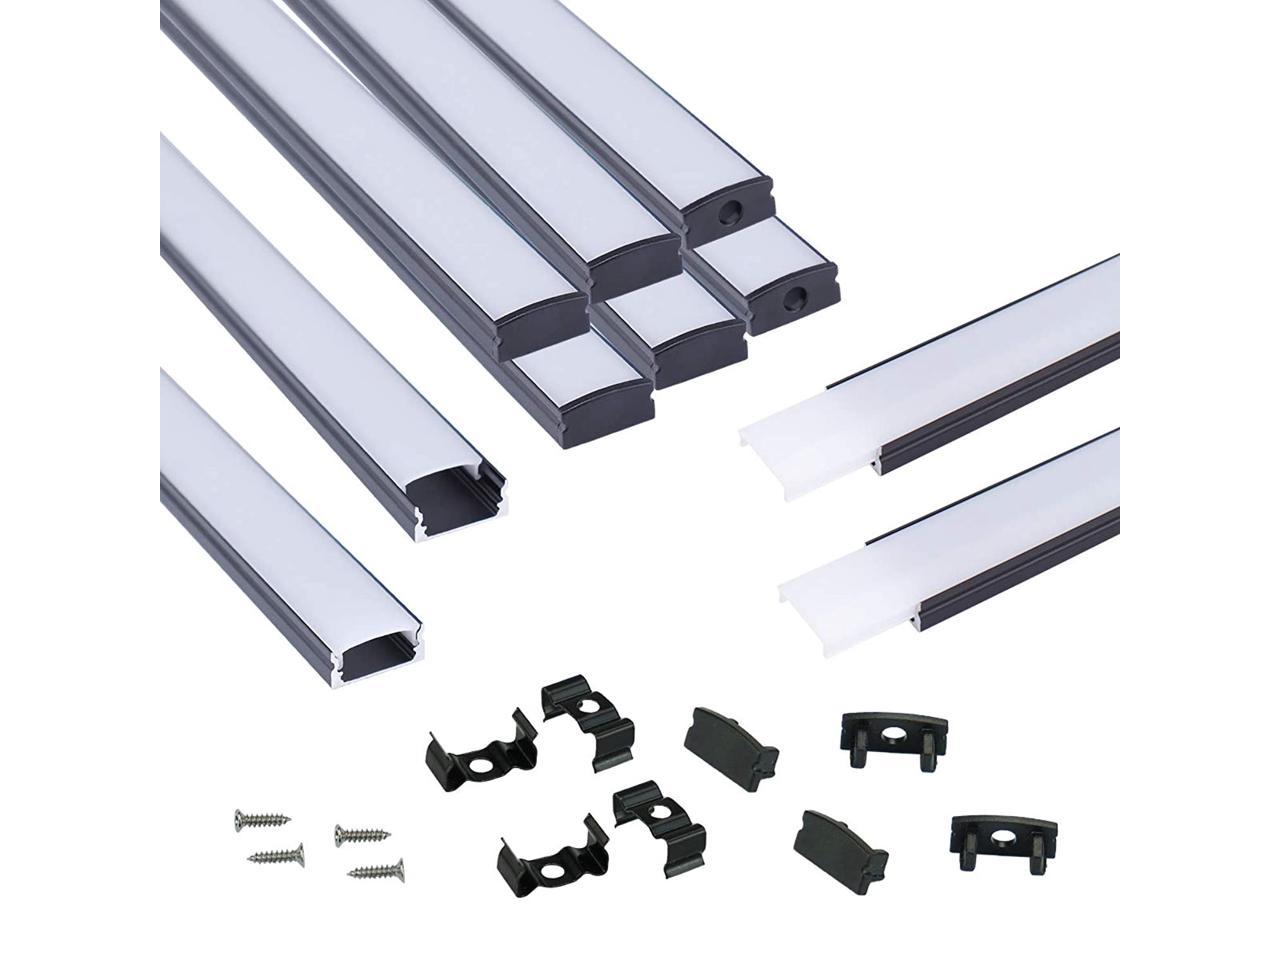 10Pack 1M/3.3FT Black Aluminum Extrusion Profile Housing Track for 3528,5050,5630 Strip Tape Lights V1SW BW 1M,LV1 LW1 Muzata V-Shape LED Channel System with Milky White Cover Lens Frosted Diffuser 